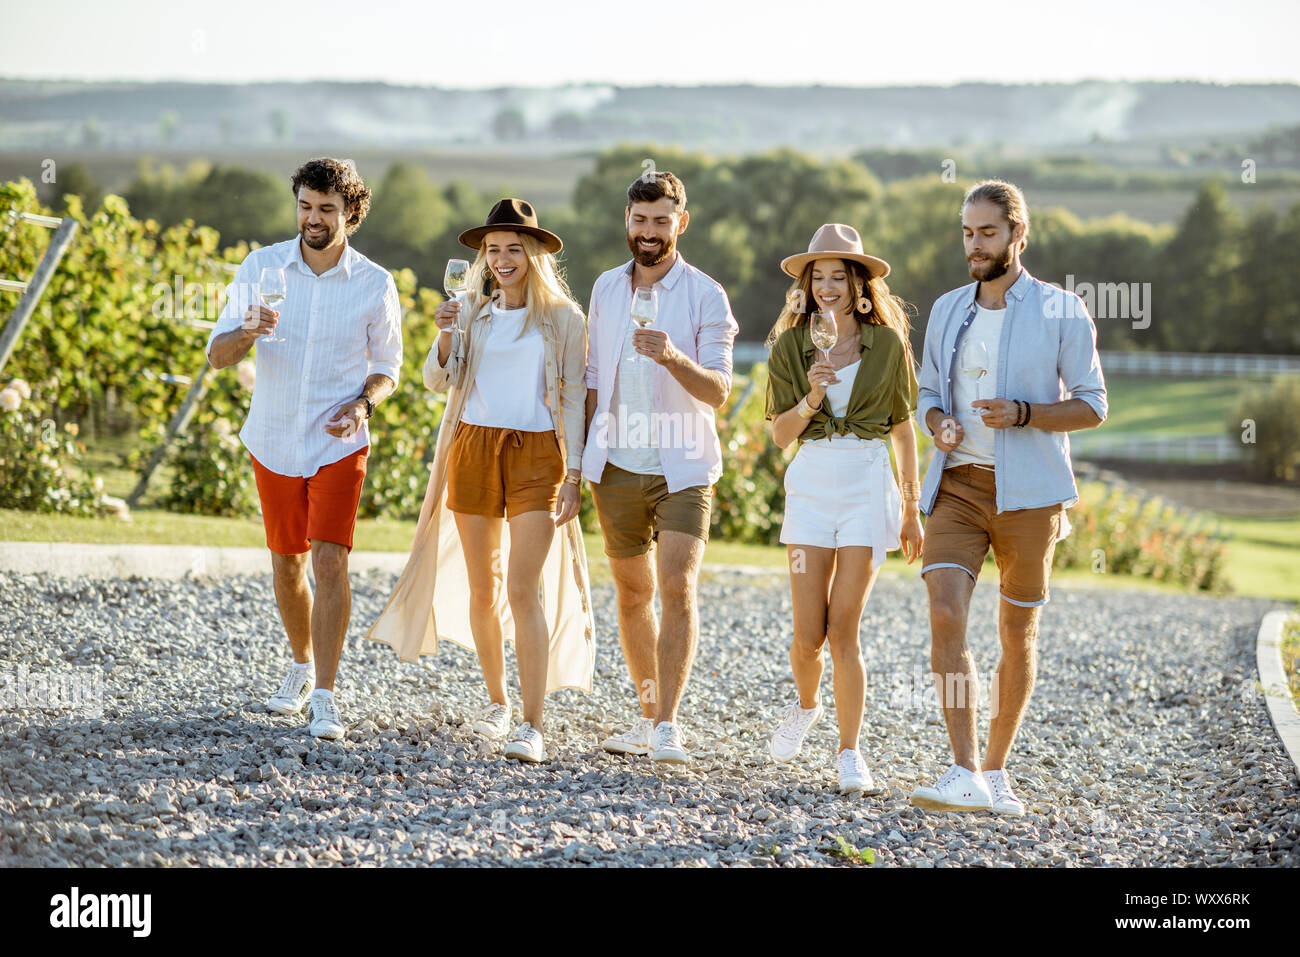 Group of young friends dressed casually hanging out together, walking with wine glasses on the vineyard on a sunny day Stock Photo